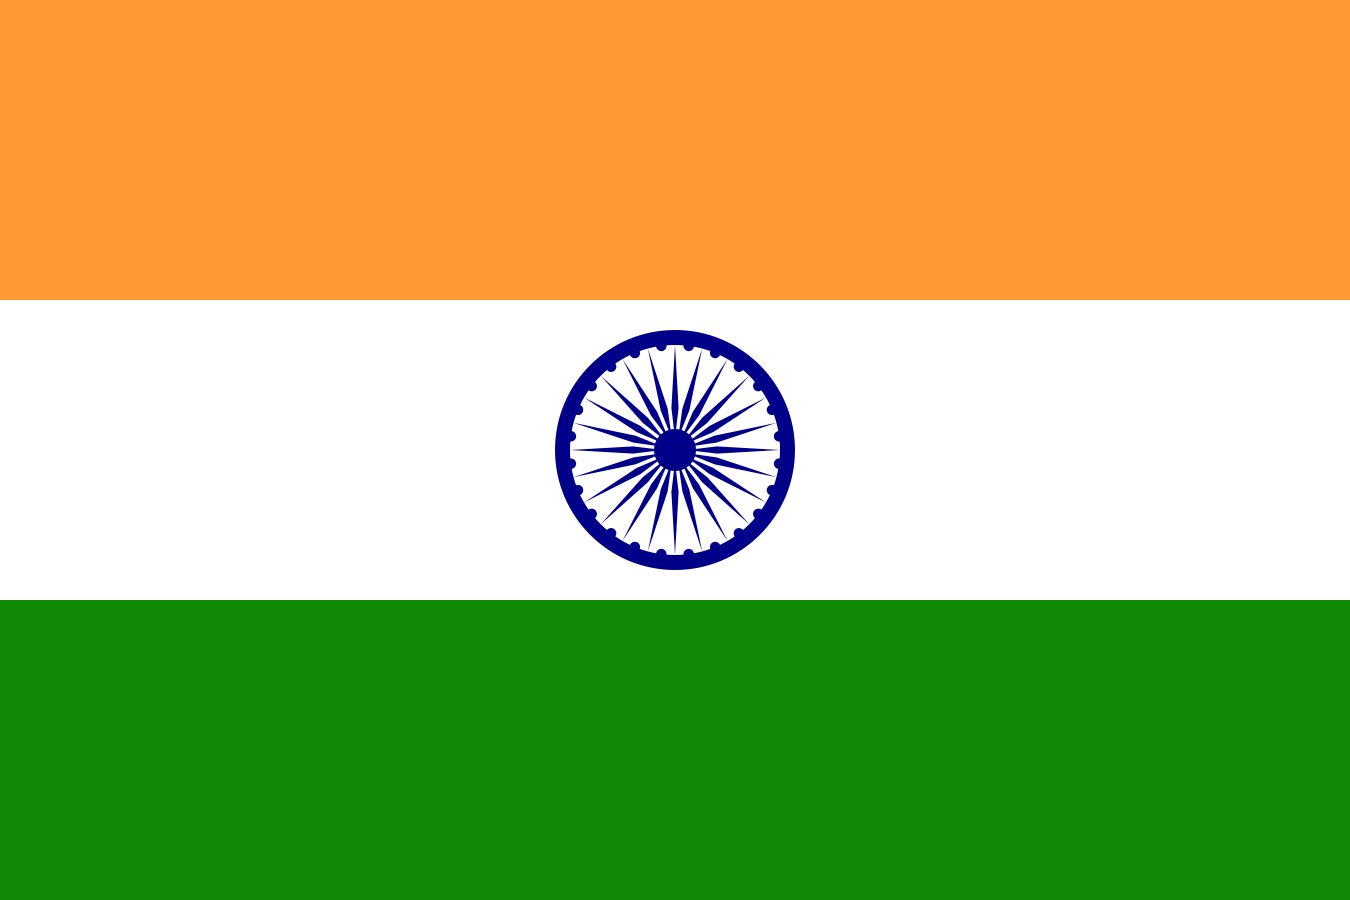 https://upload.wikimedia.org/wikipedia/en/thumb/4/41/Flag_of_India.svg/1350px-Flag_of_India.svg.png